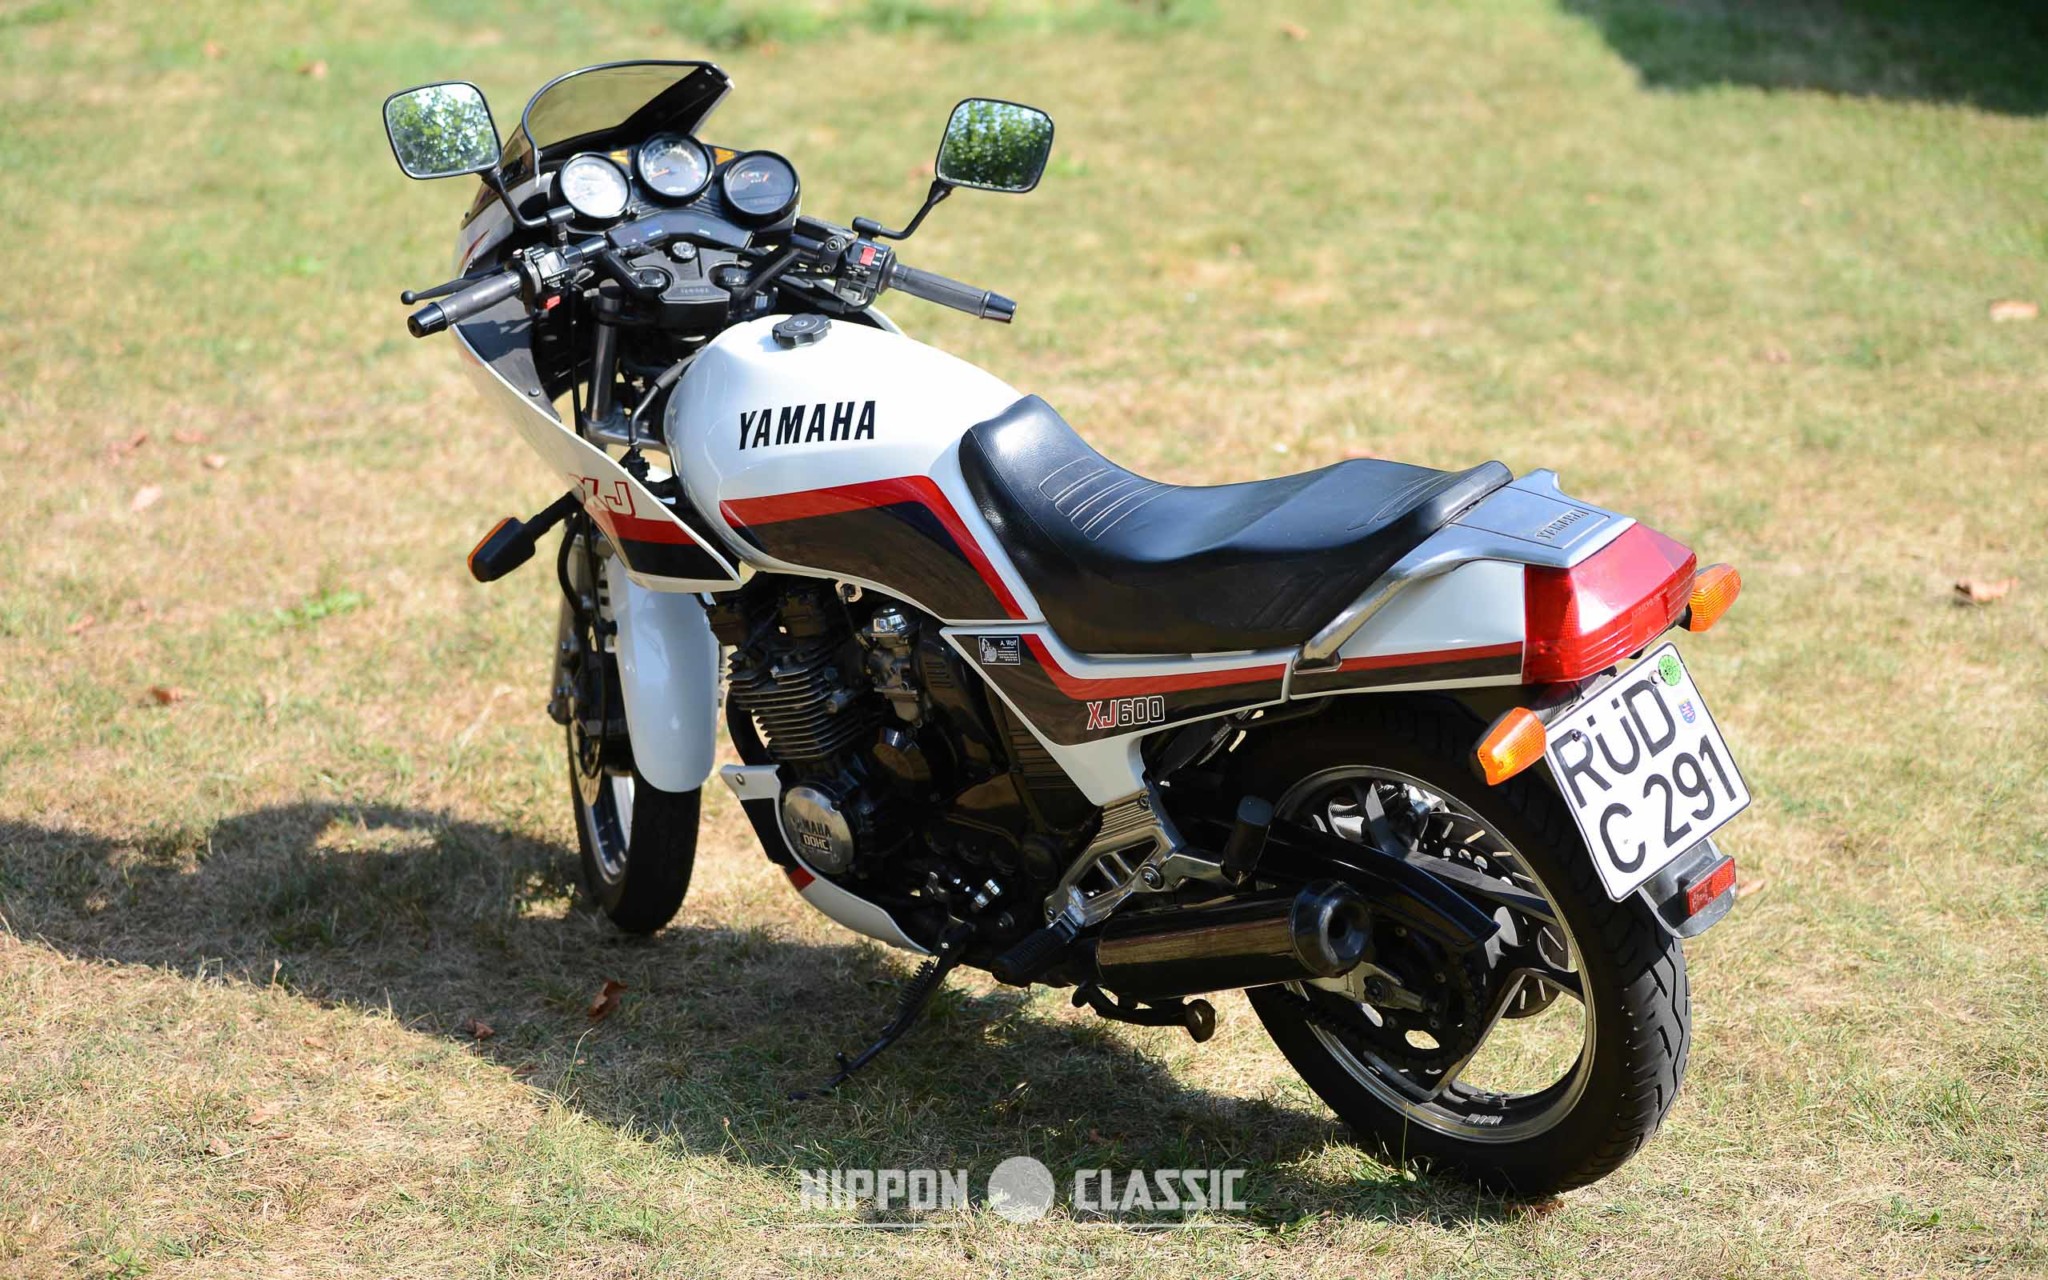 Yamaha_XJ600_Caferacer_3_Scheck-Motorcycles - Nippon 